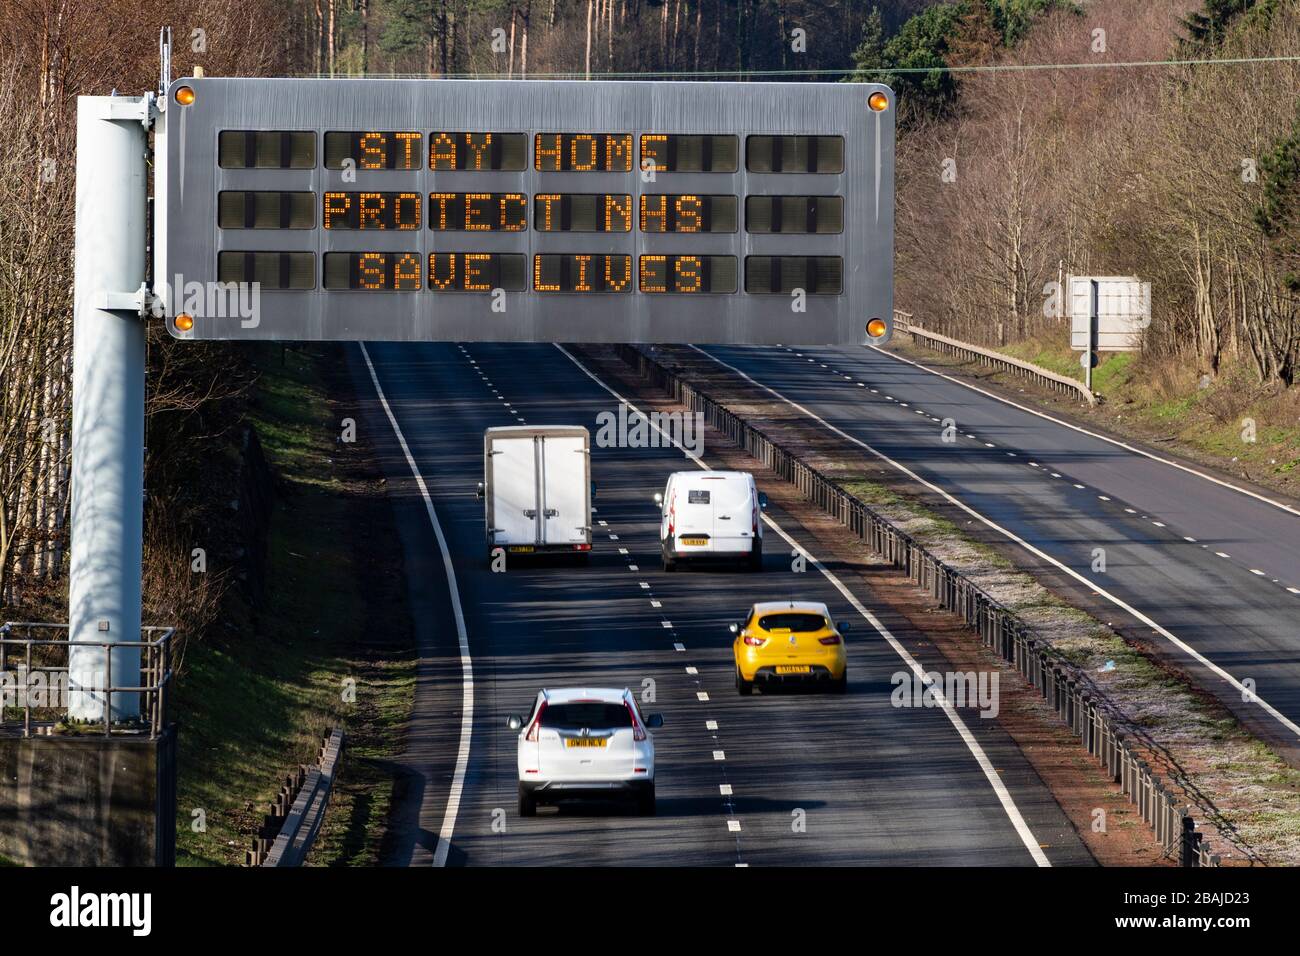 East Lothian, Scotland, UK. 28 March, 2020. Coronavirus lockdown roadside warning sign with message STAY HOME PROTECT NHS SAVE LIVES on A1 highway in East Lothian. Iain Masterton/Alamy Live News Stock Photo